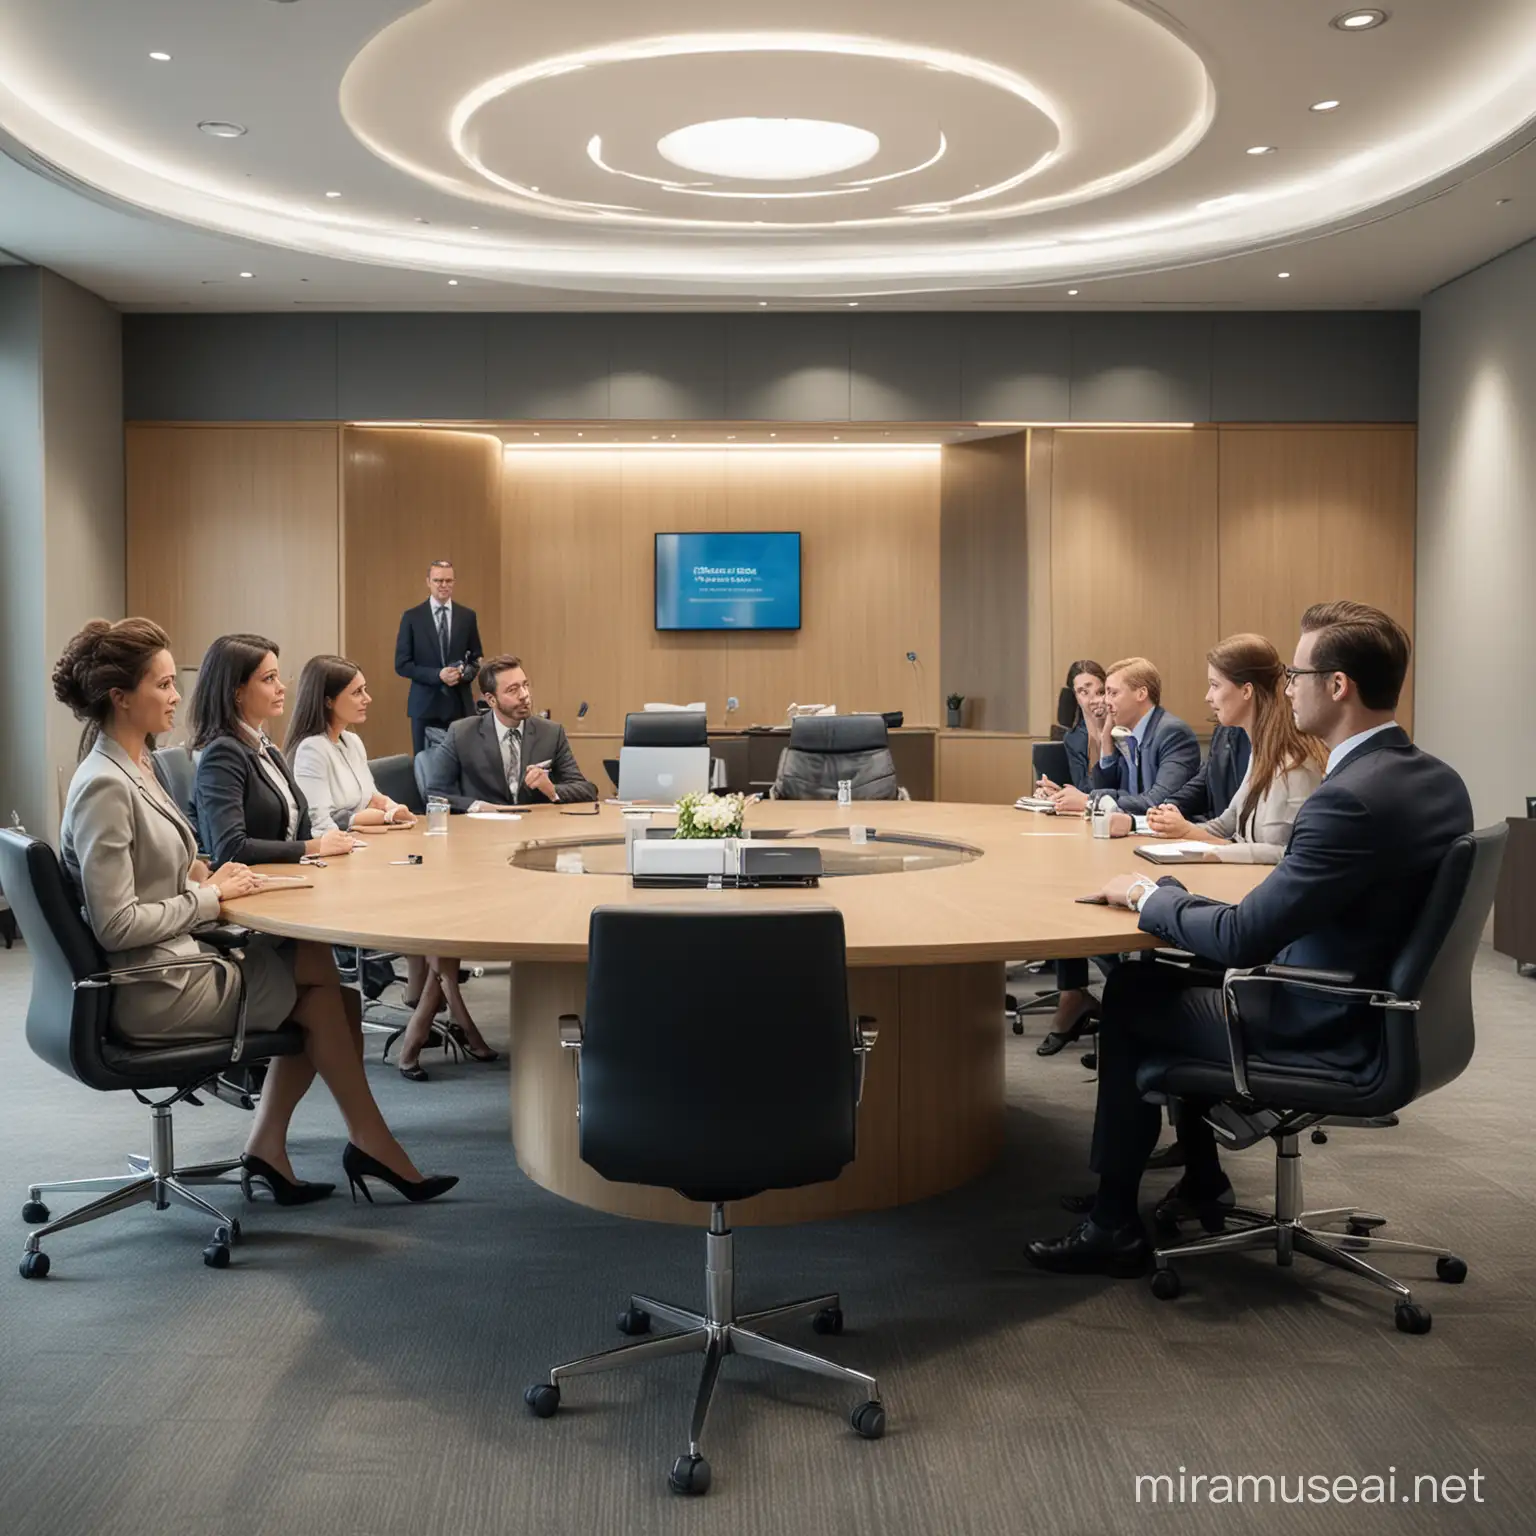 Regenerate me a photo in a large shot where bank agents woman and man dressed class in a meeting room sitting around a round table with other bank agents standing who talk to each other in the middle of a meeting.